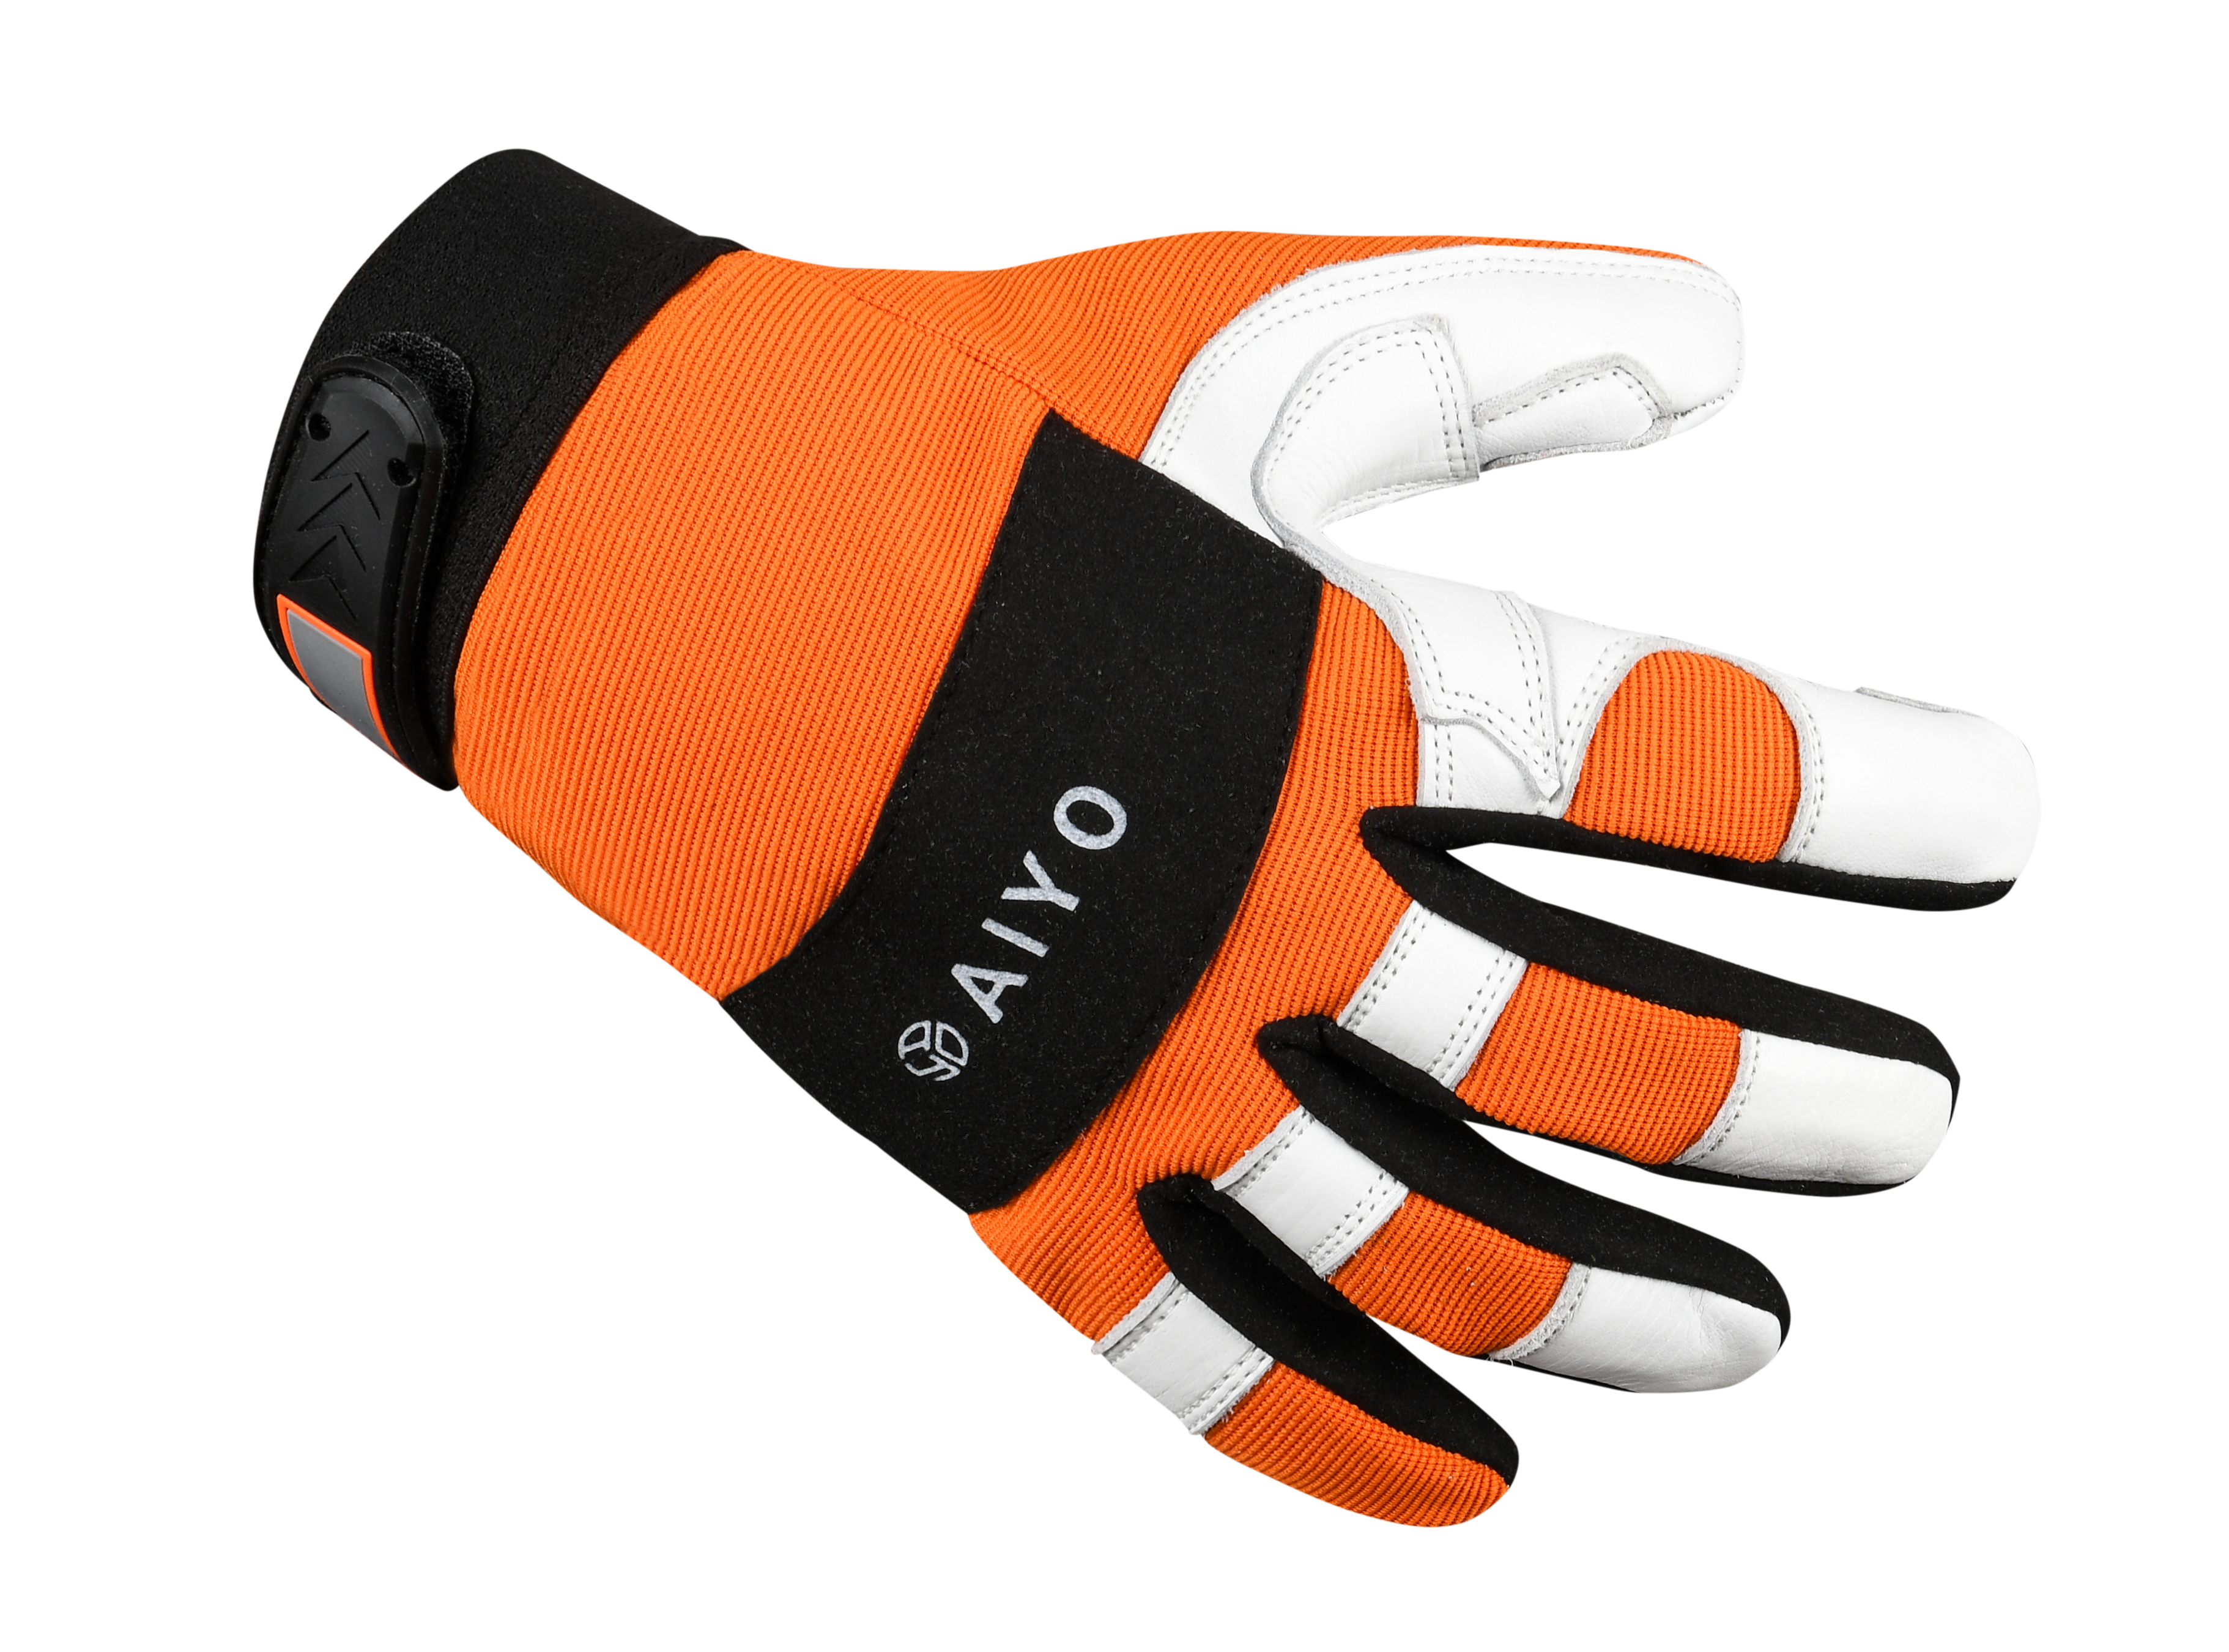 Alzera Chainsaw Glove: Unmatched protection for hands in outdoor wood environments, ensuring safety with premium materials